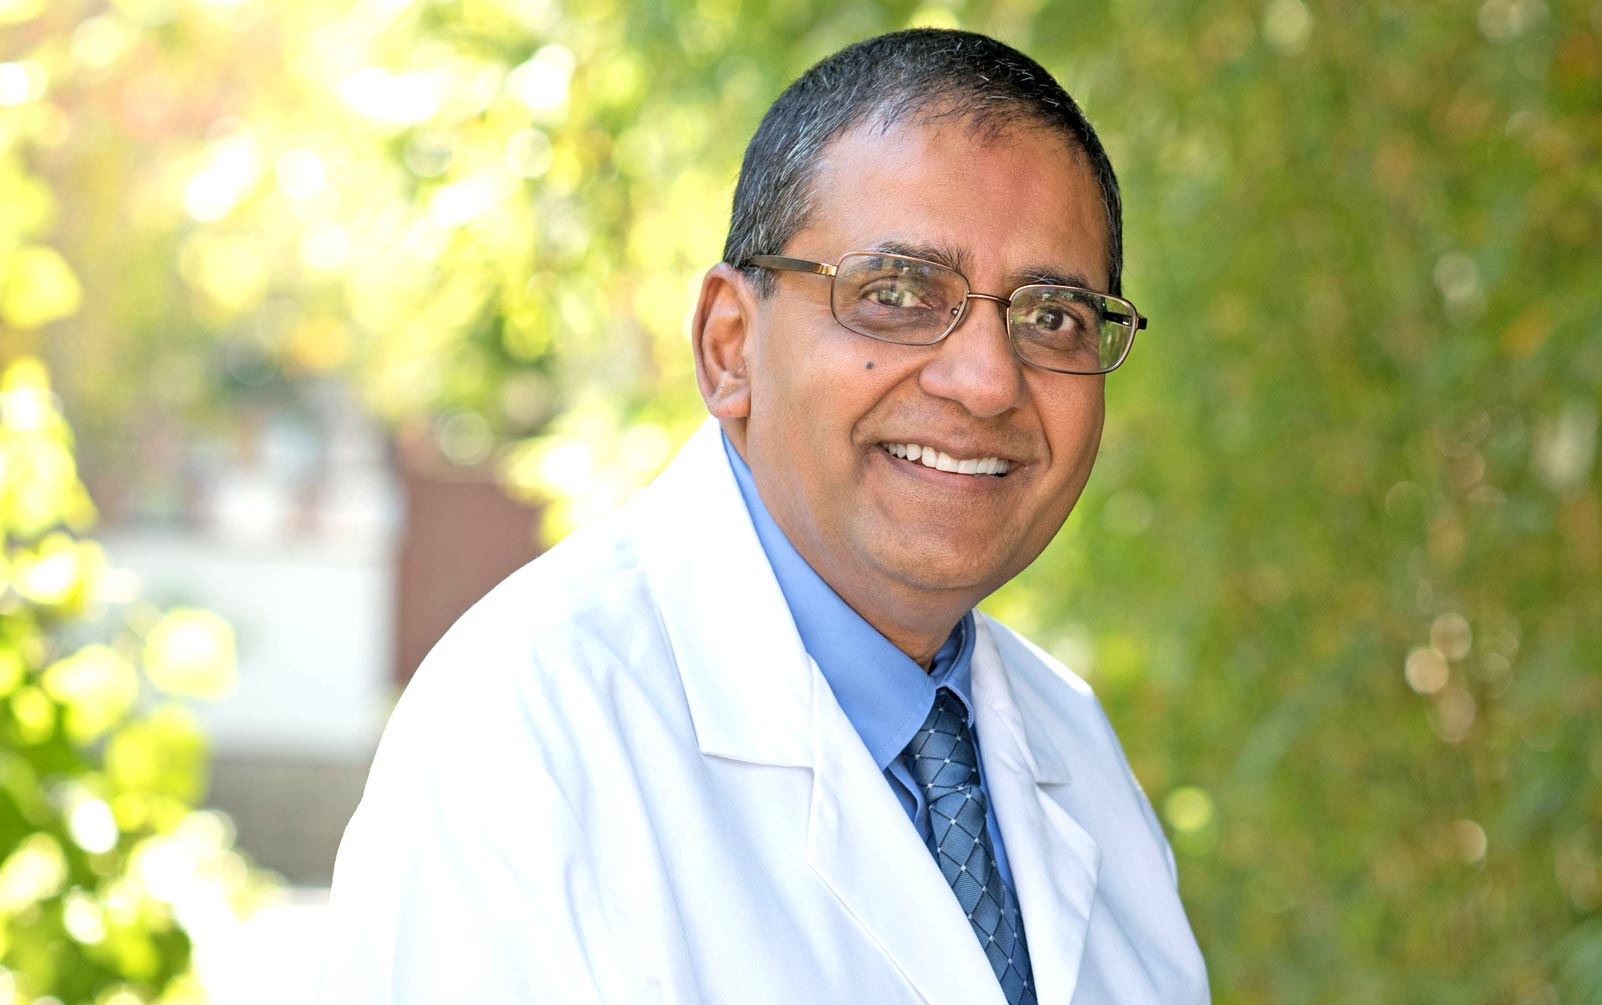 Treating Patients with MET Alterations: A Q&A with Dr. Ravi Salgia